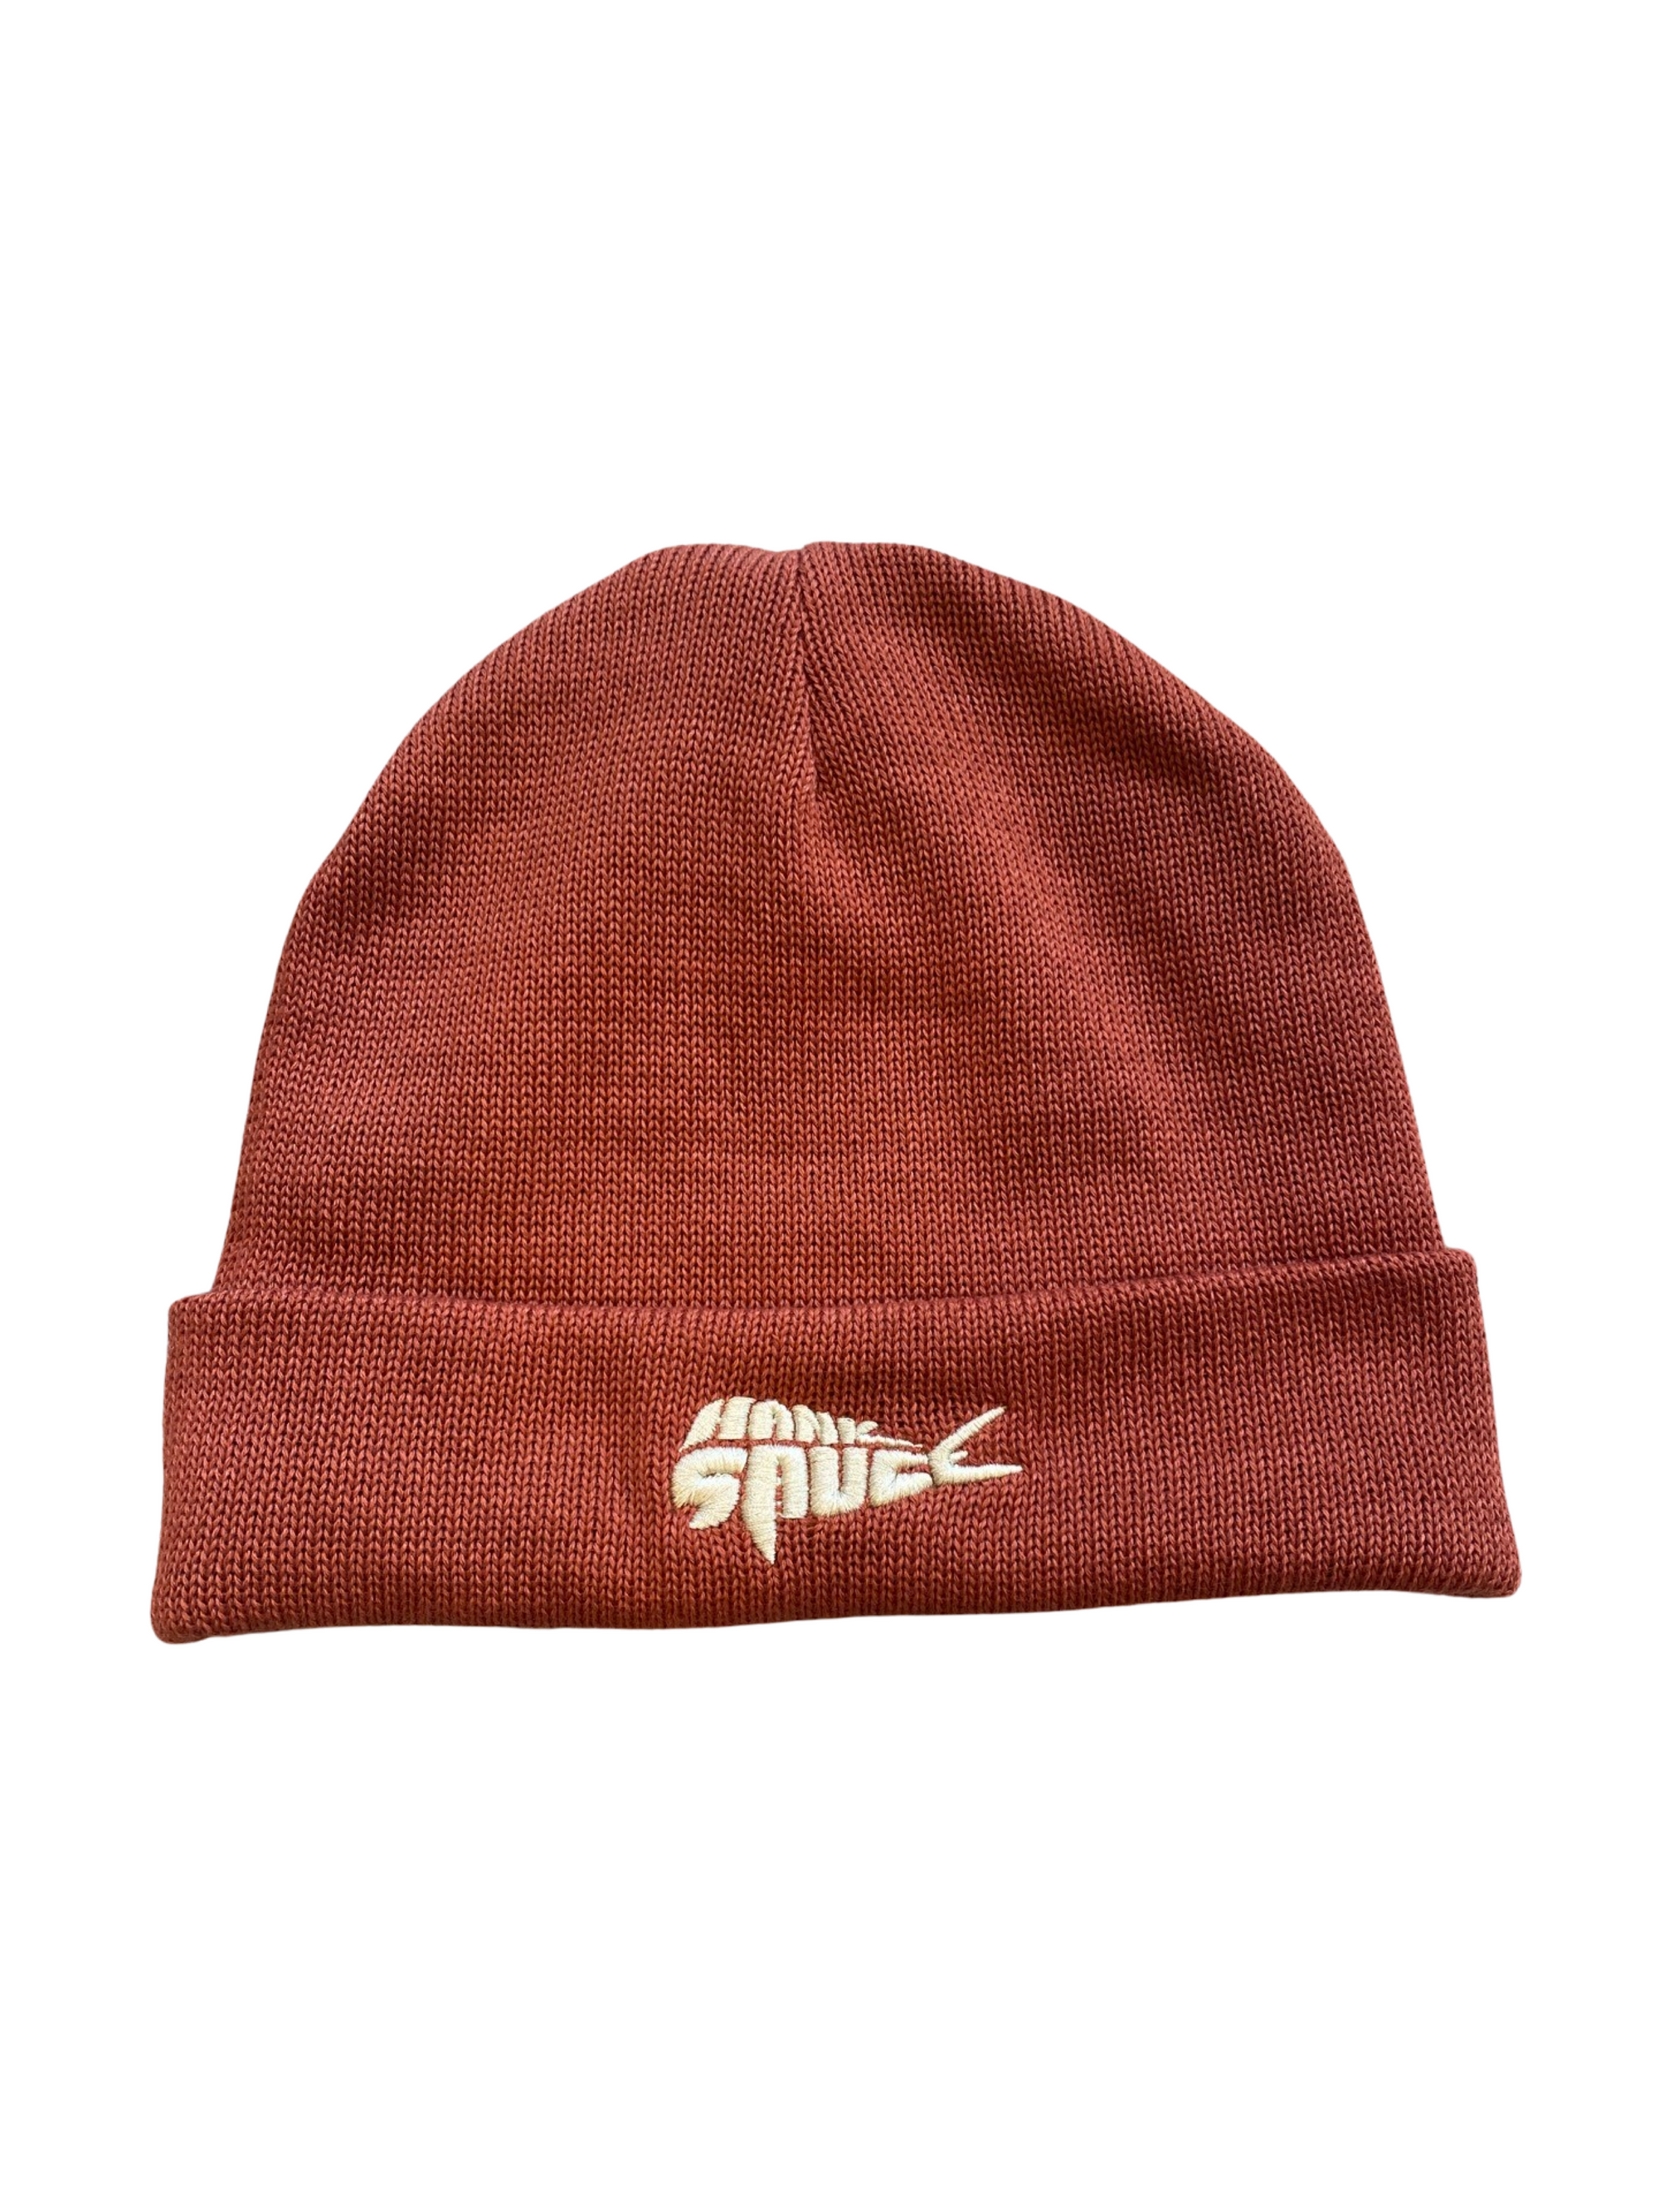 Spanish Red Knit Hat